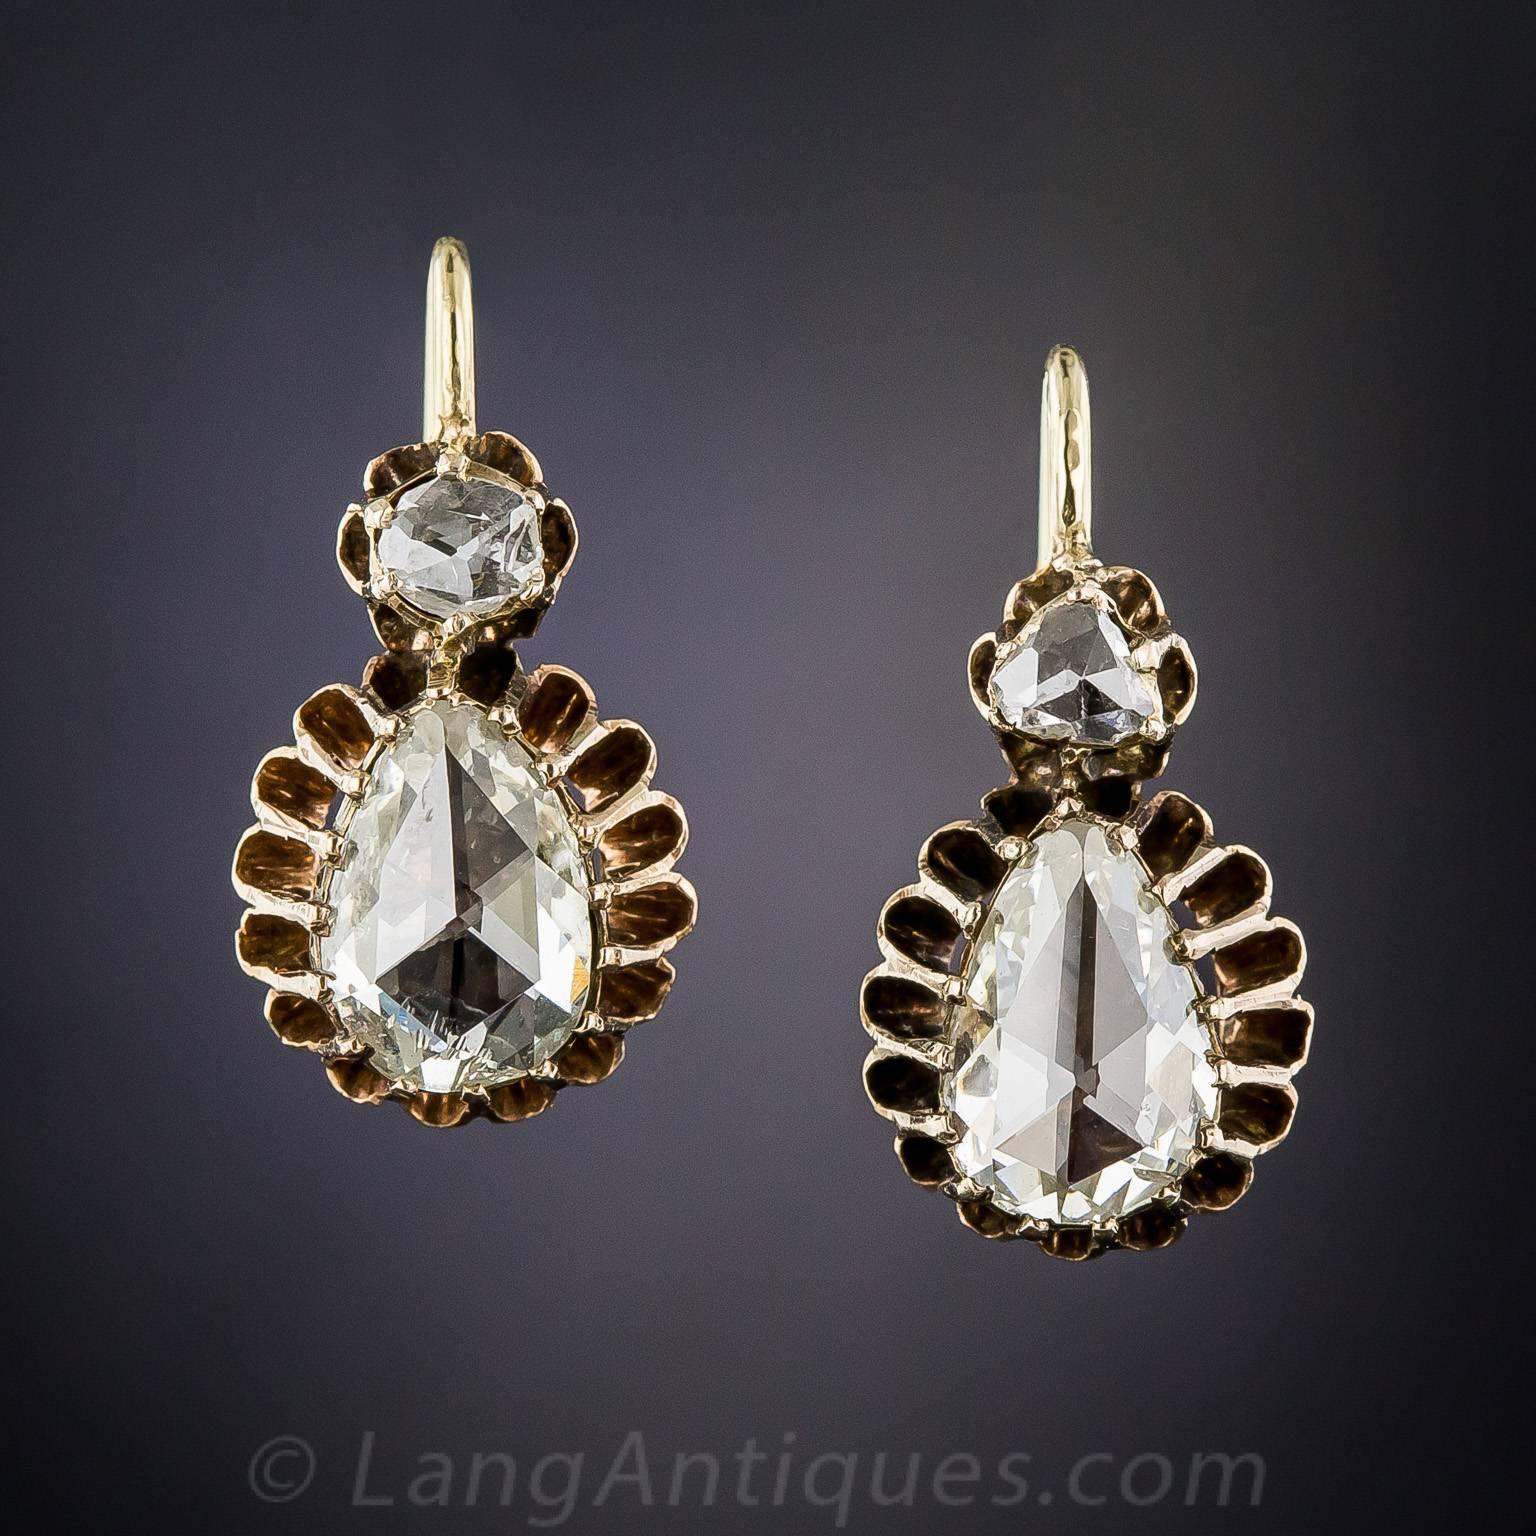 Rare, radiant and absolutely ravishing, original rose-cut diamond earrings, dating from the latter-19th century, highlighting an exceptional pair of pear shape diamonds, totaling approximately 2.30 carats. The scintillating stones are presented in